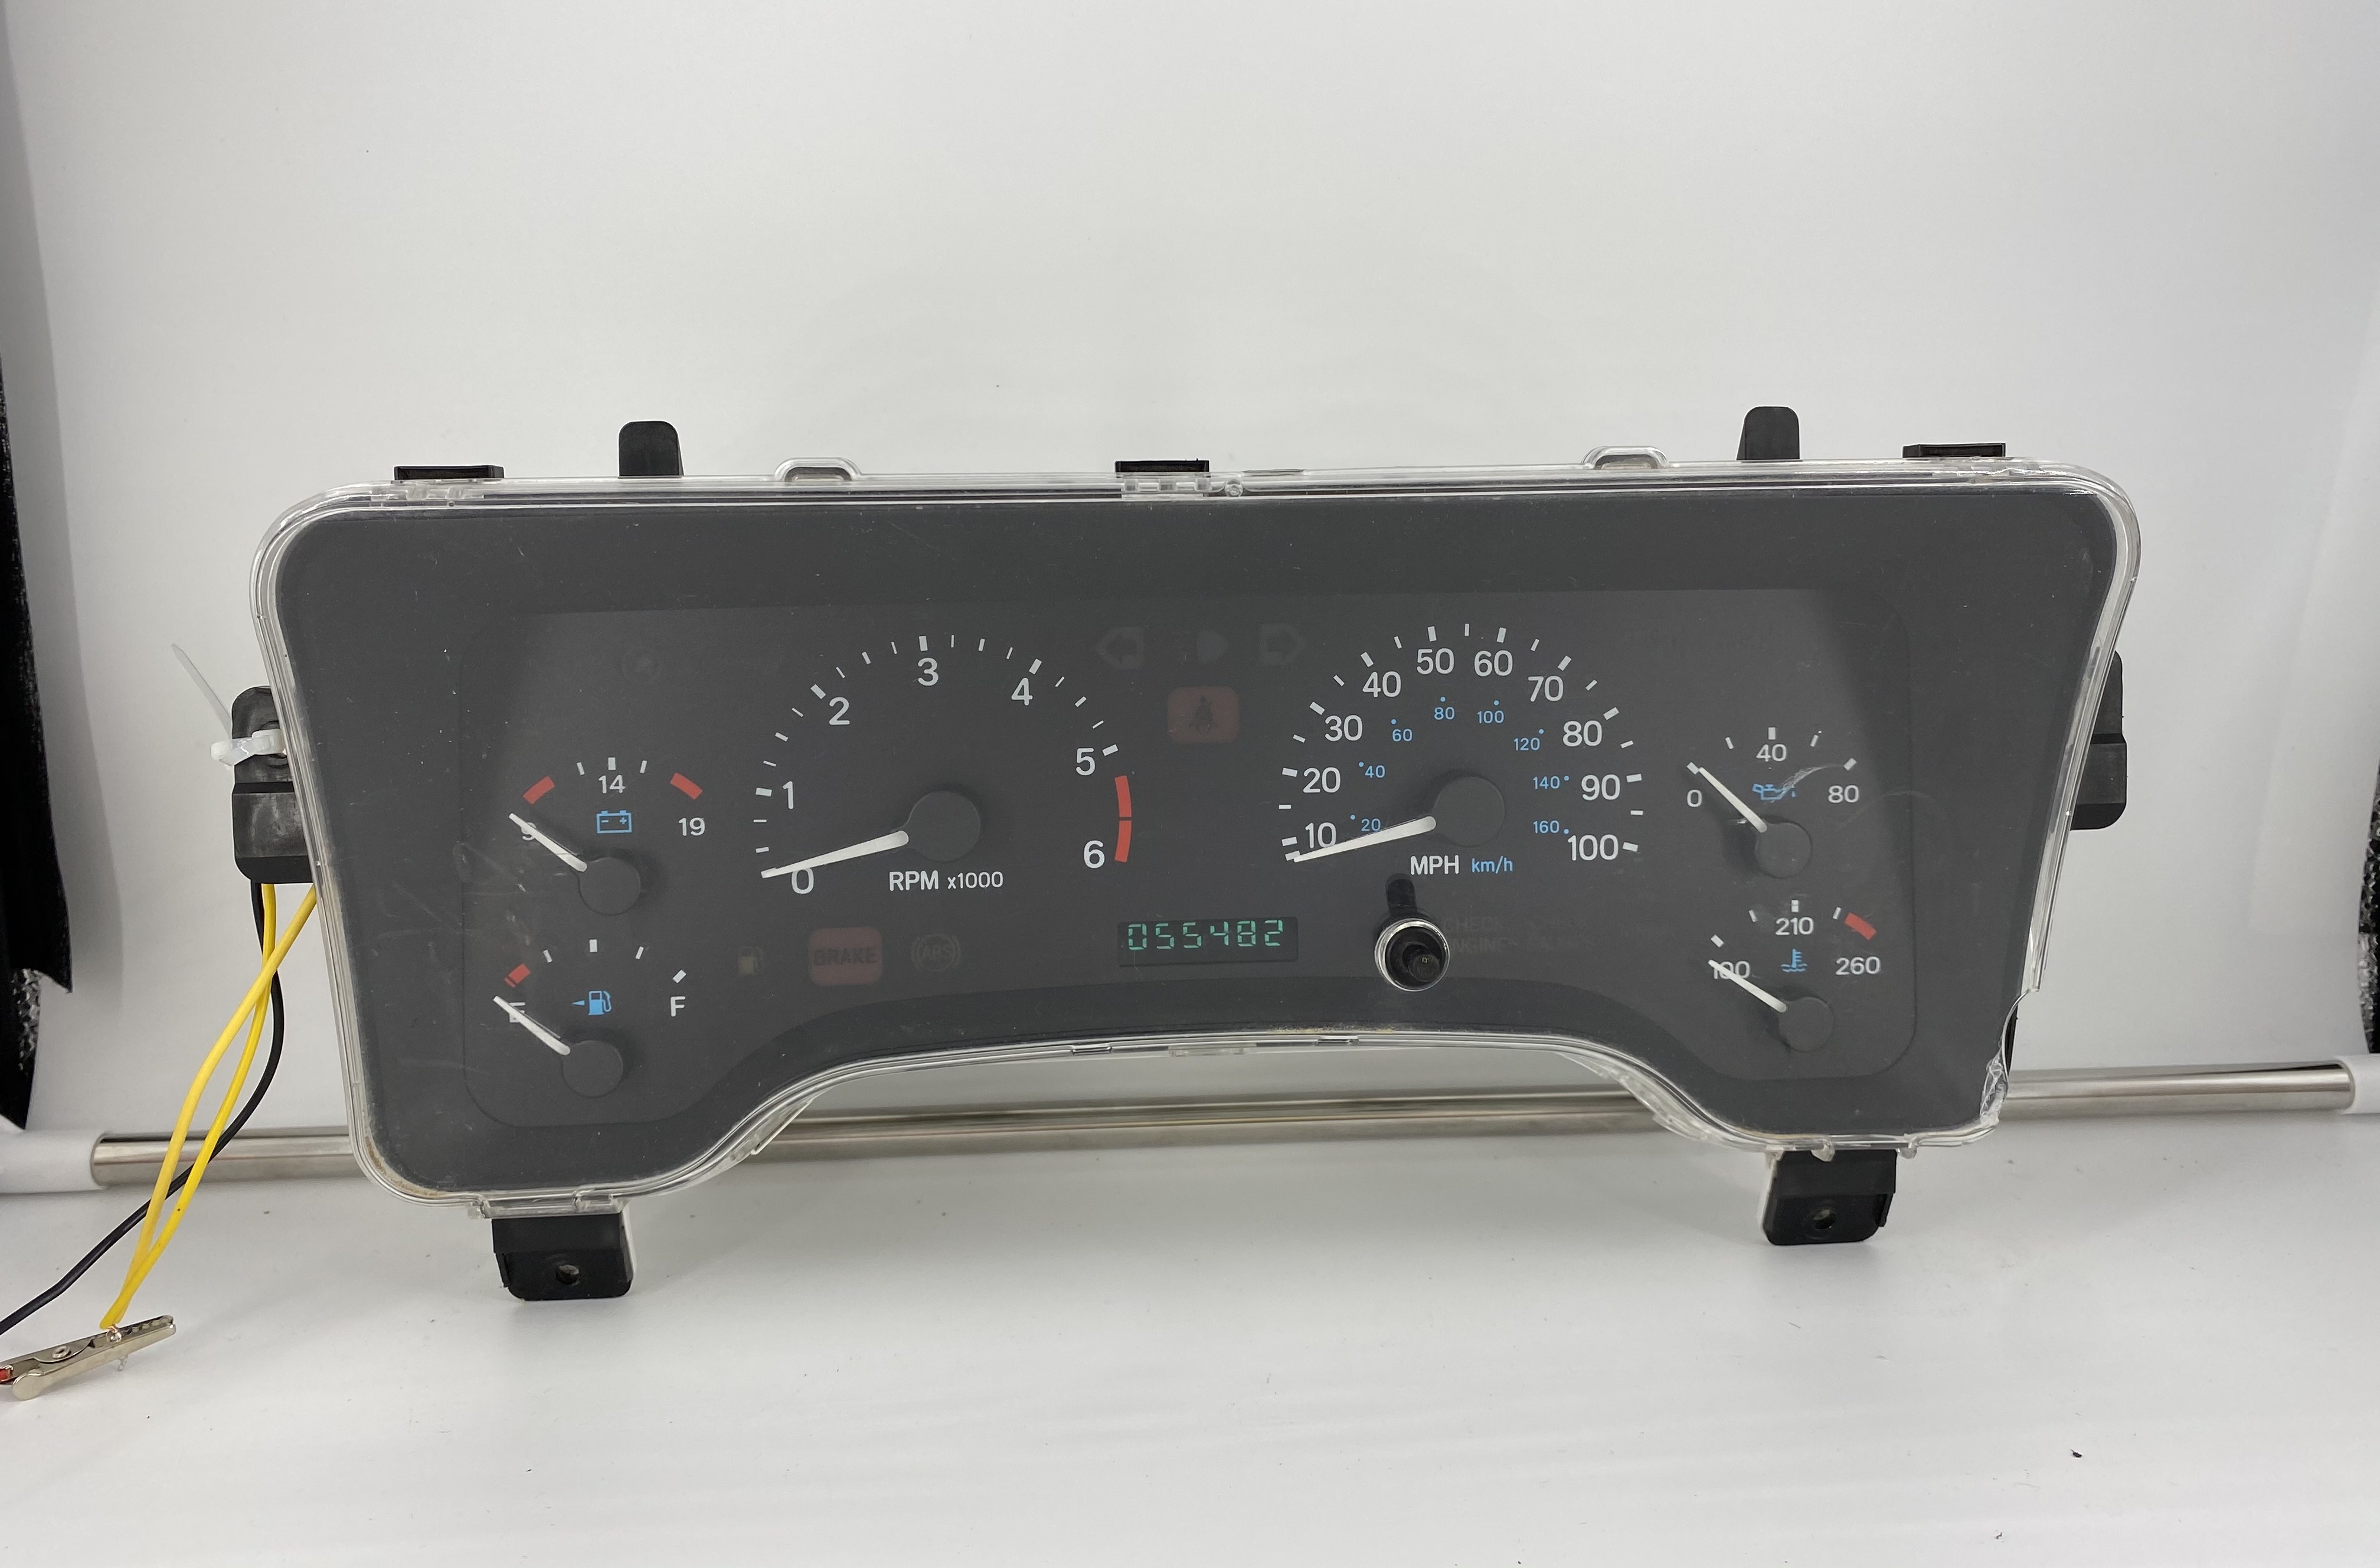 1998 JEEP WRANGLER USED DASHBOARD INSTRUMENT CLUSTER FOR SALE (MPH) -  DASHBOARD INSTRUMENT CLUSTER